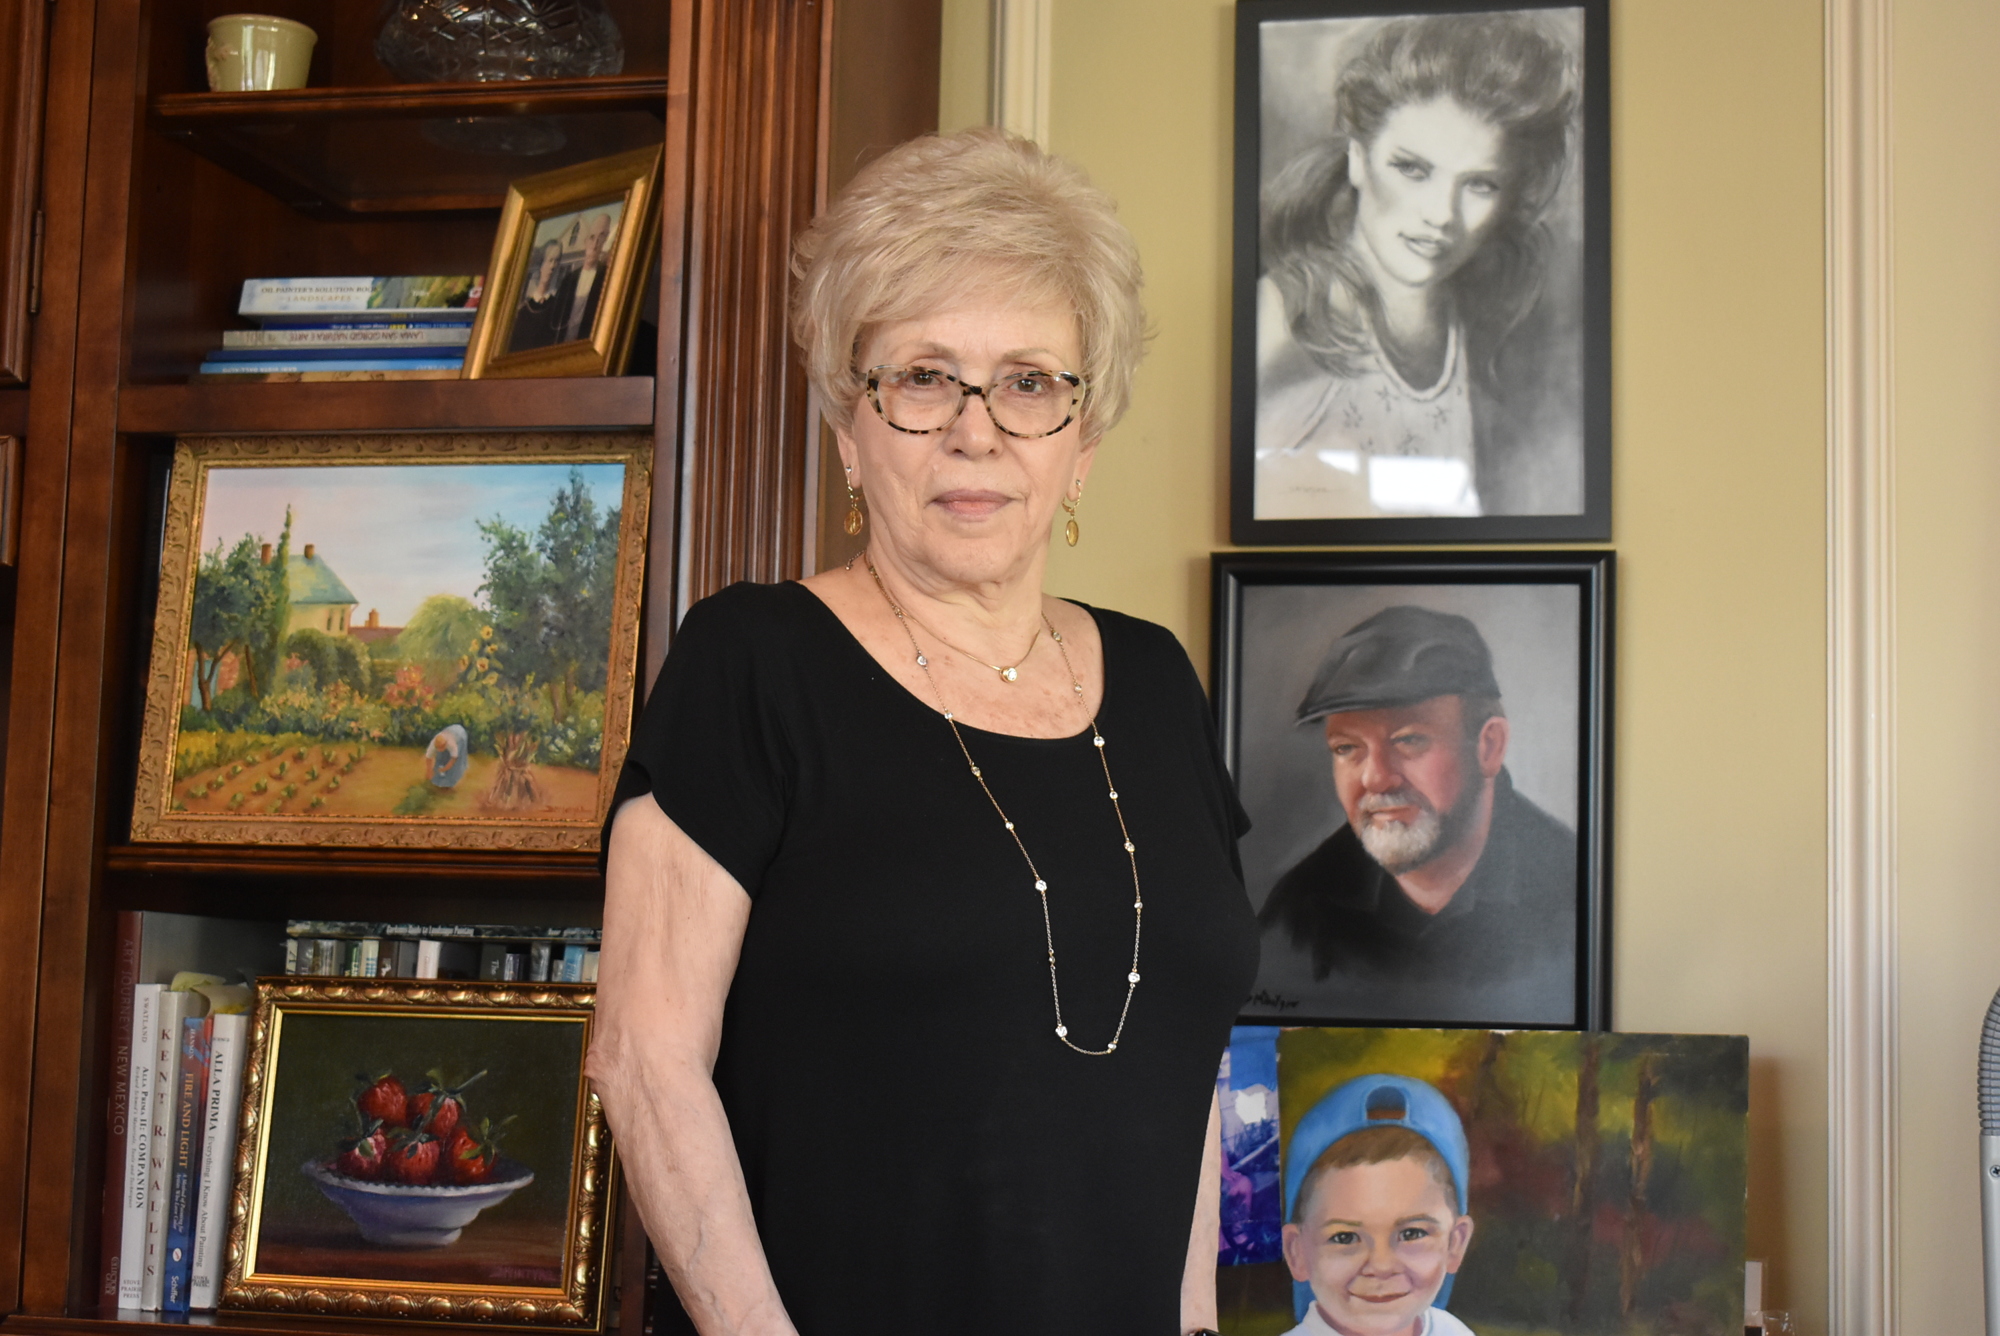 Country Club resident Donna McIntyre, 79, stands among her paintings in her art studio two days after receiving her first dose of the COVID-19 vaccine. She is looking forward to painting with her friends again.